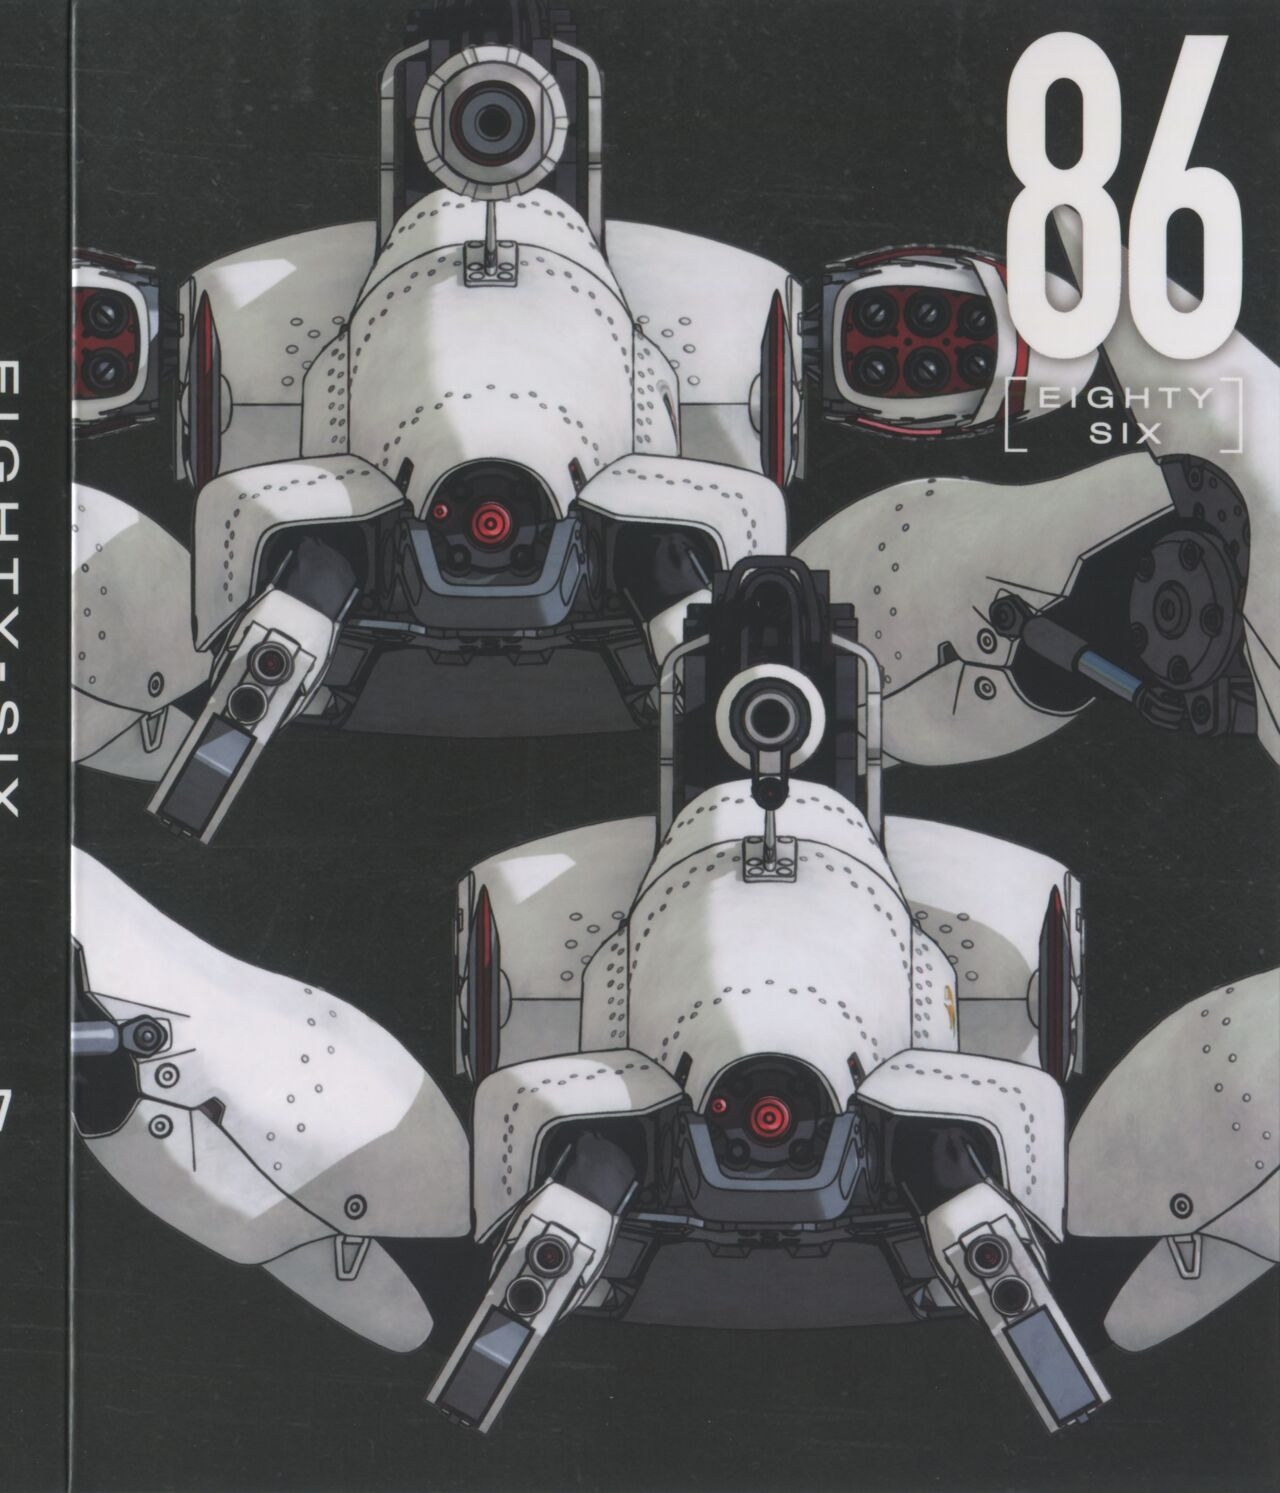 86 Eighty Six BD Scans + Booklet 234